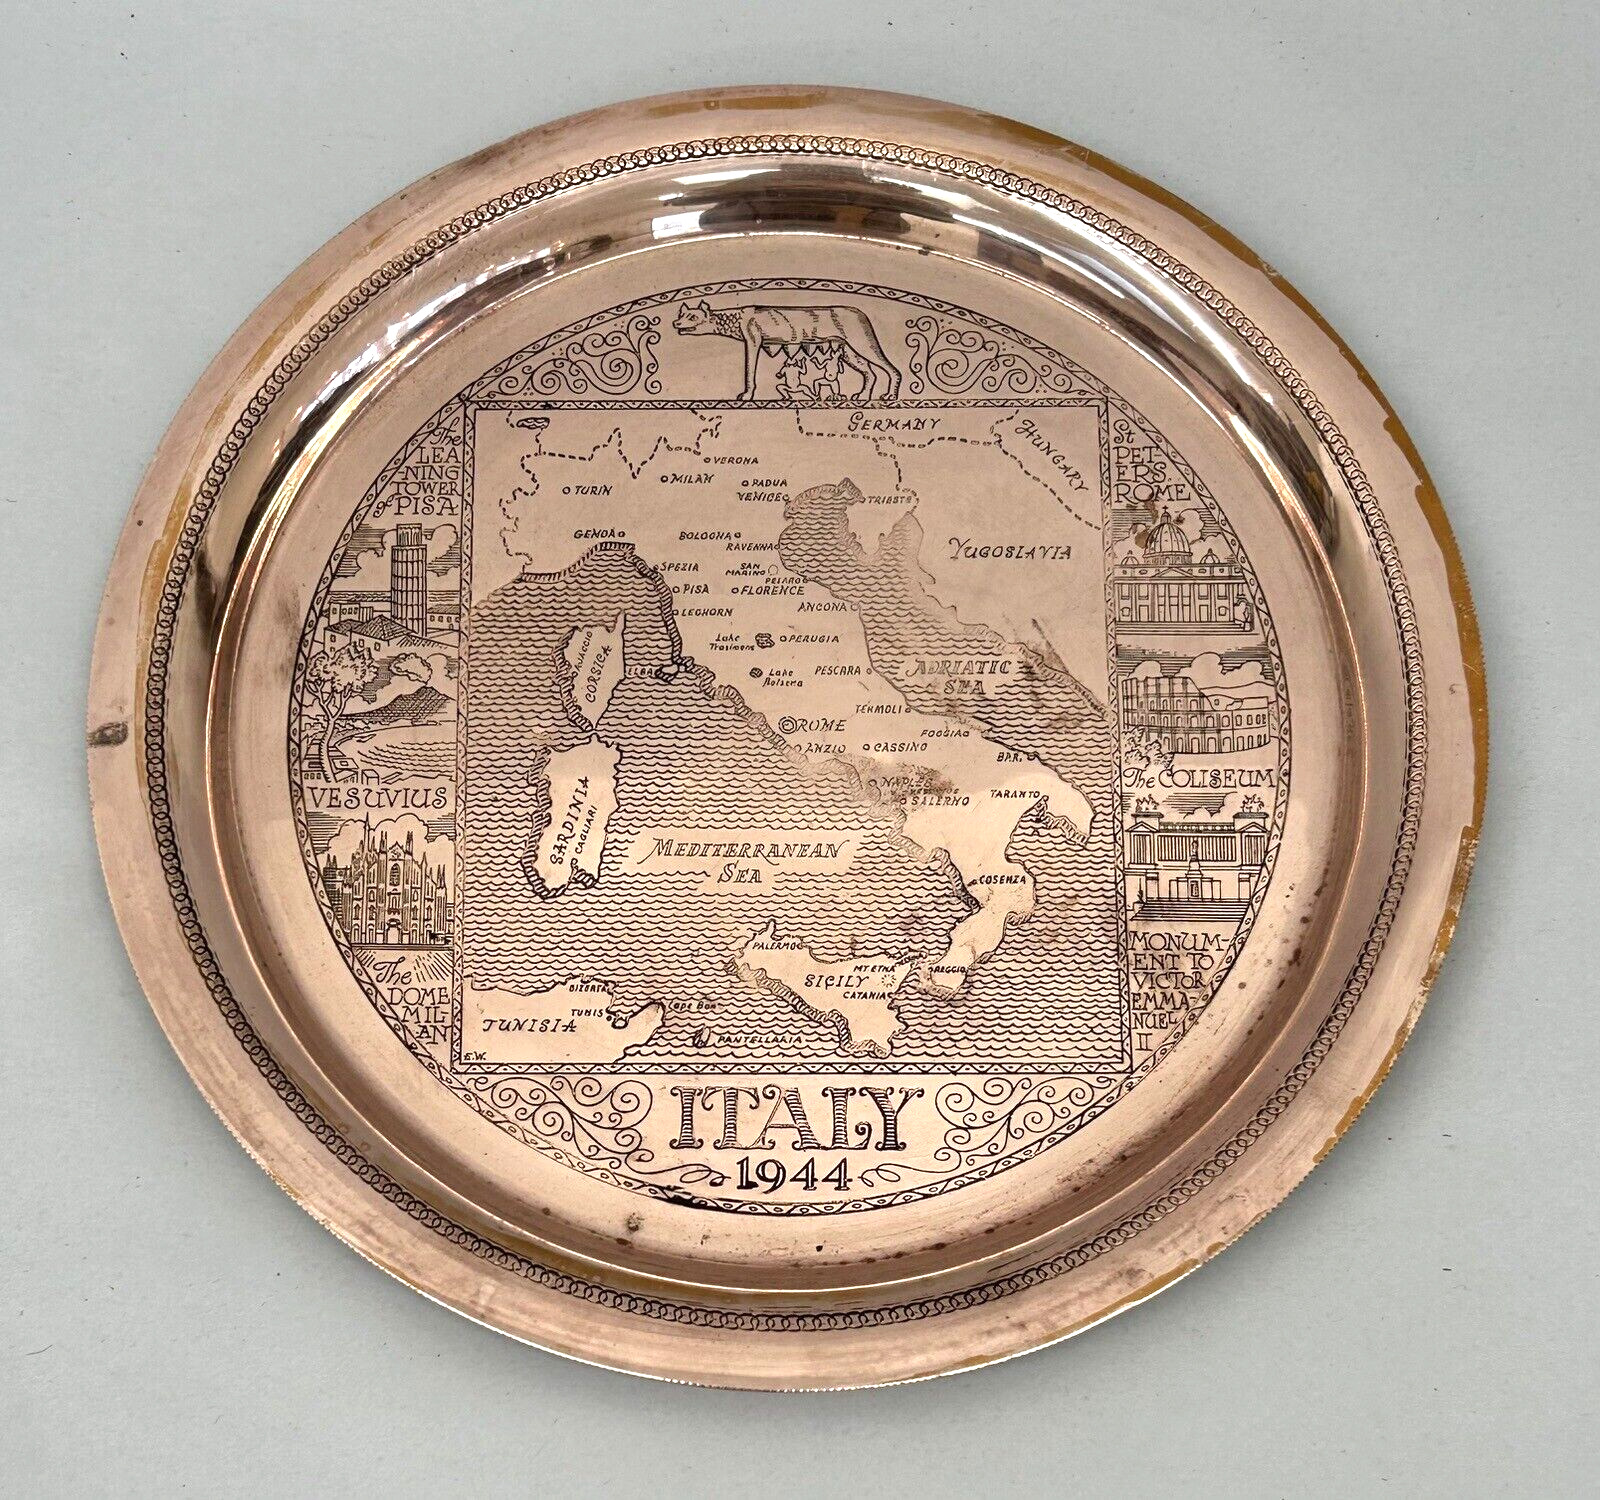 Vintage 1944 Copper Italy Engraved Plate WWII Italian Campaign Souvenir